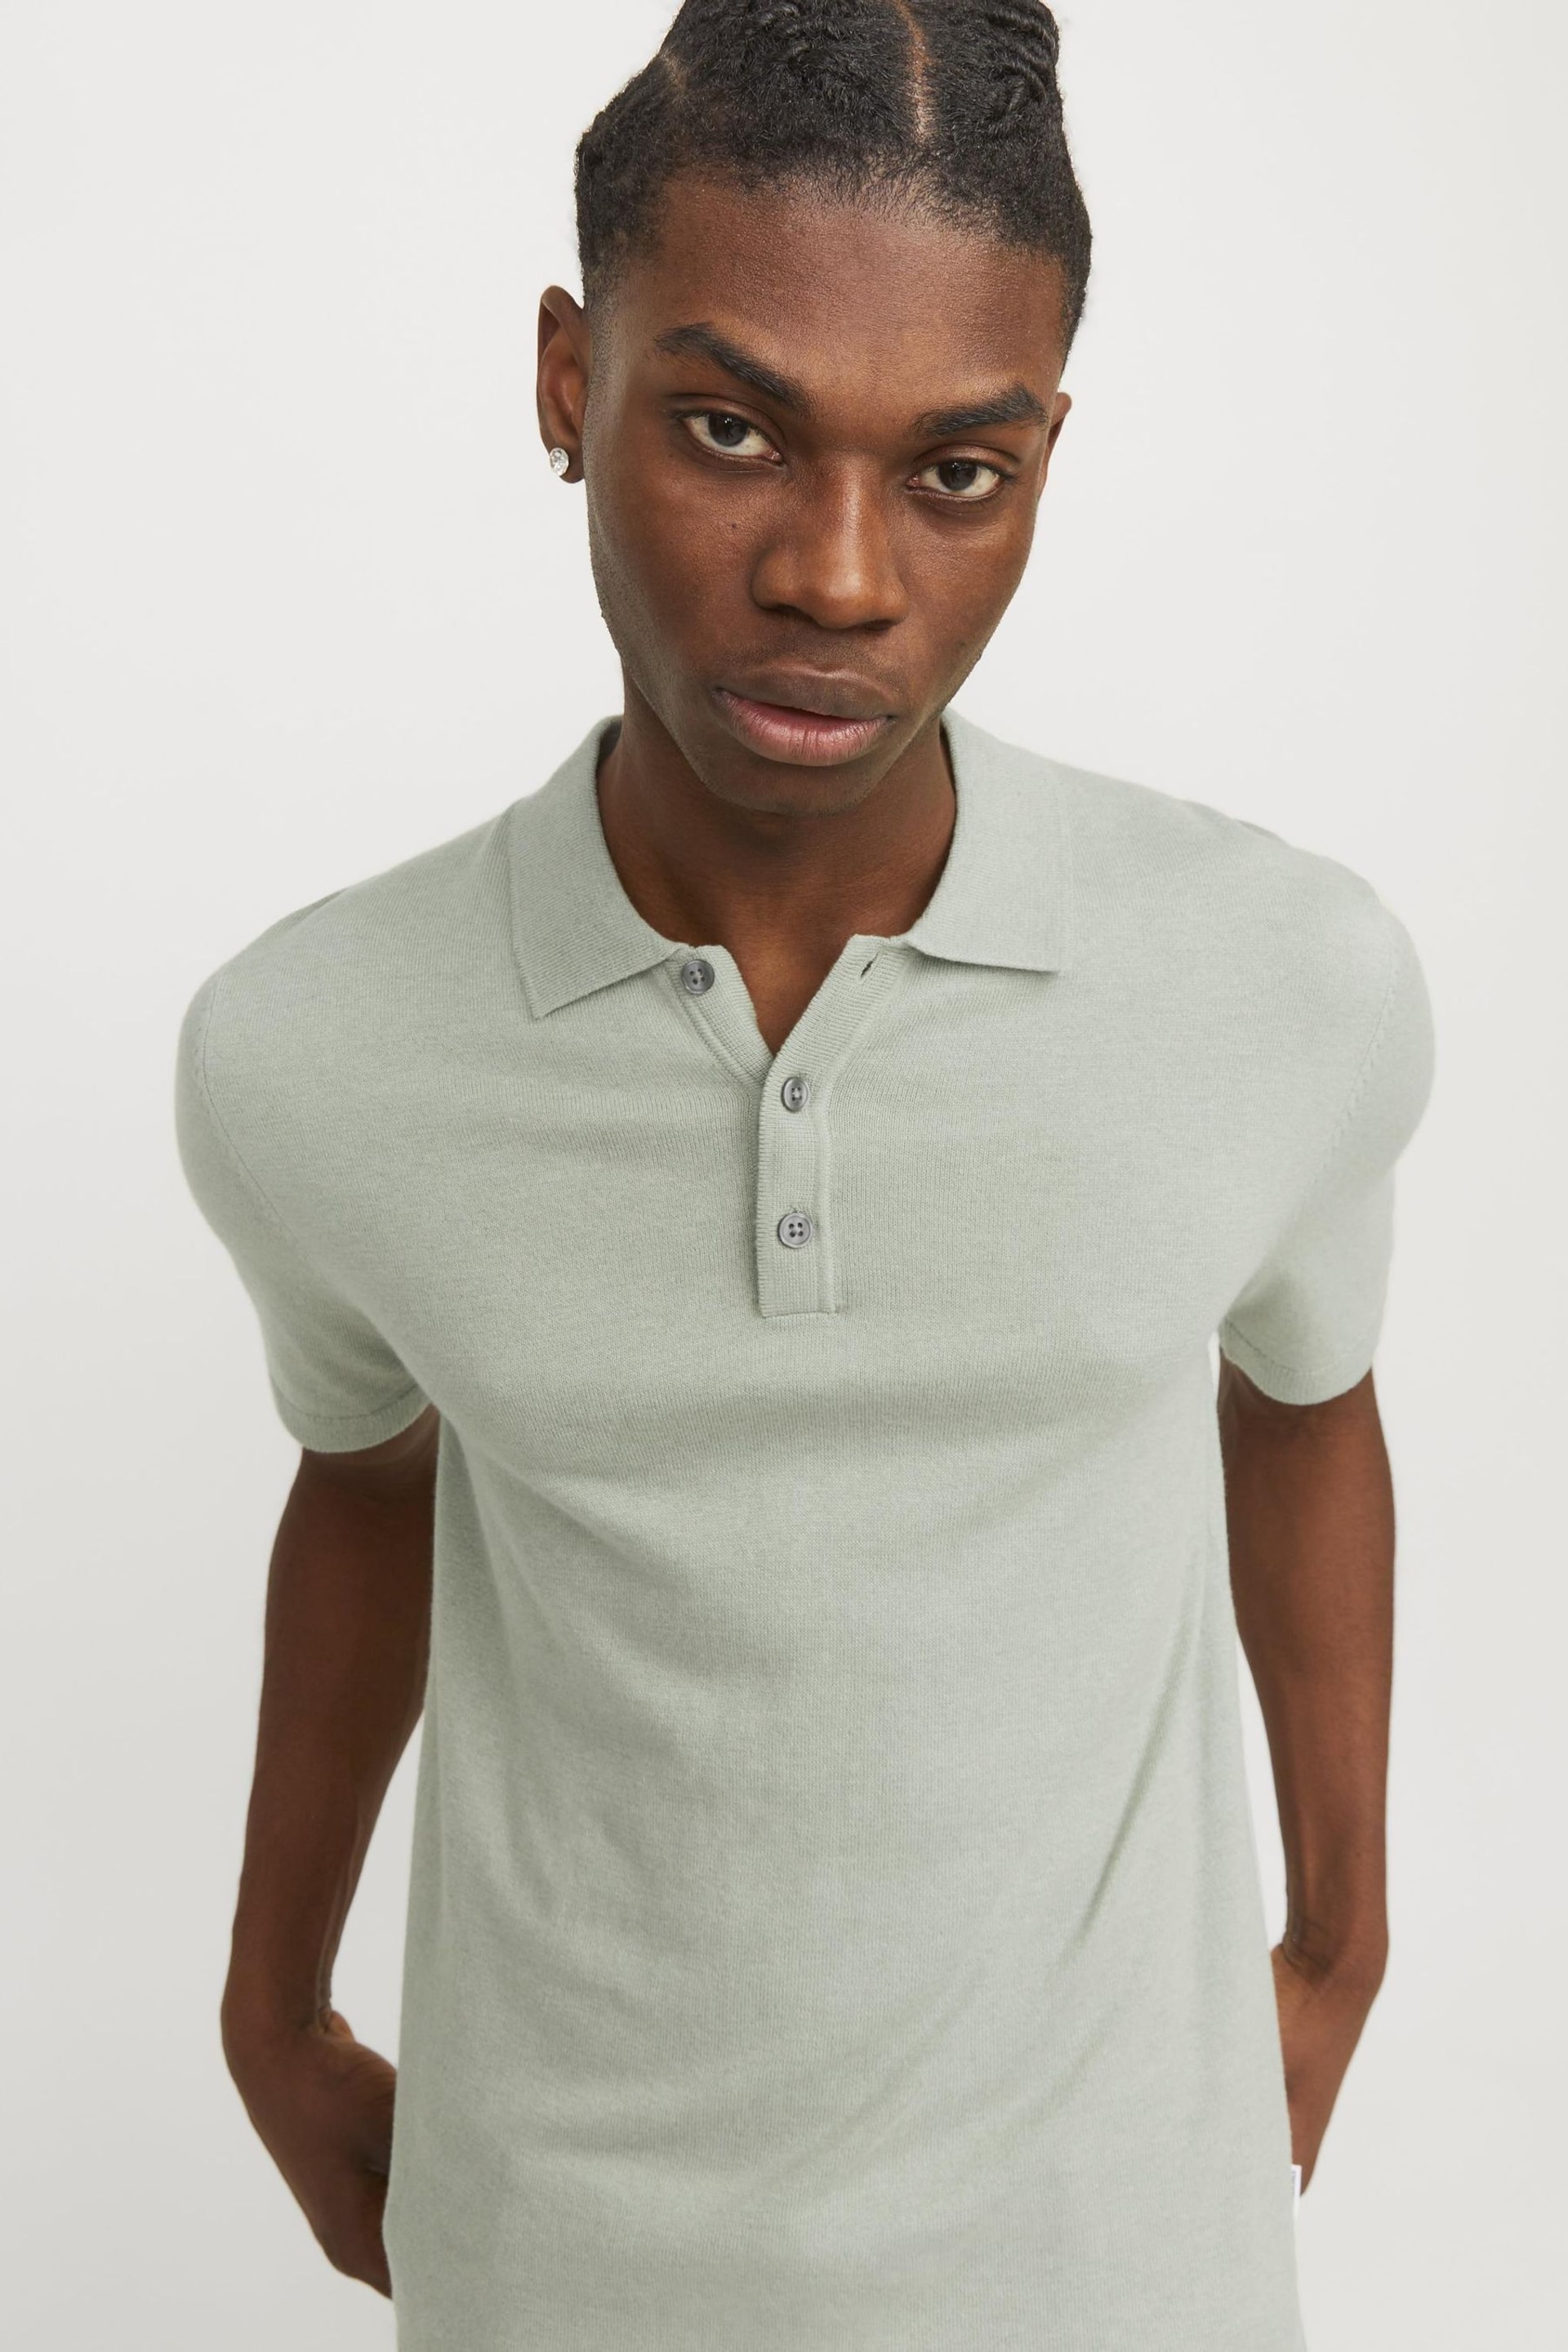 JACK & JONES Green Knitted Polo Top - Image 4 of 5